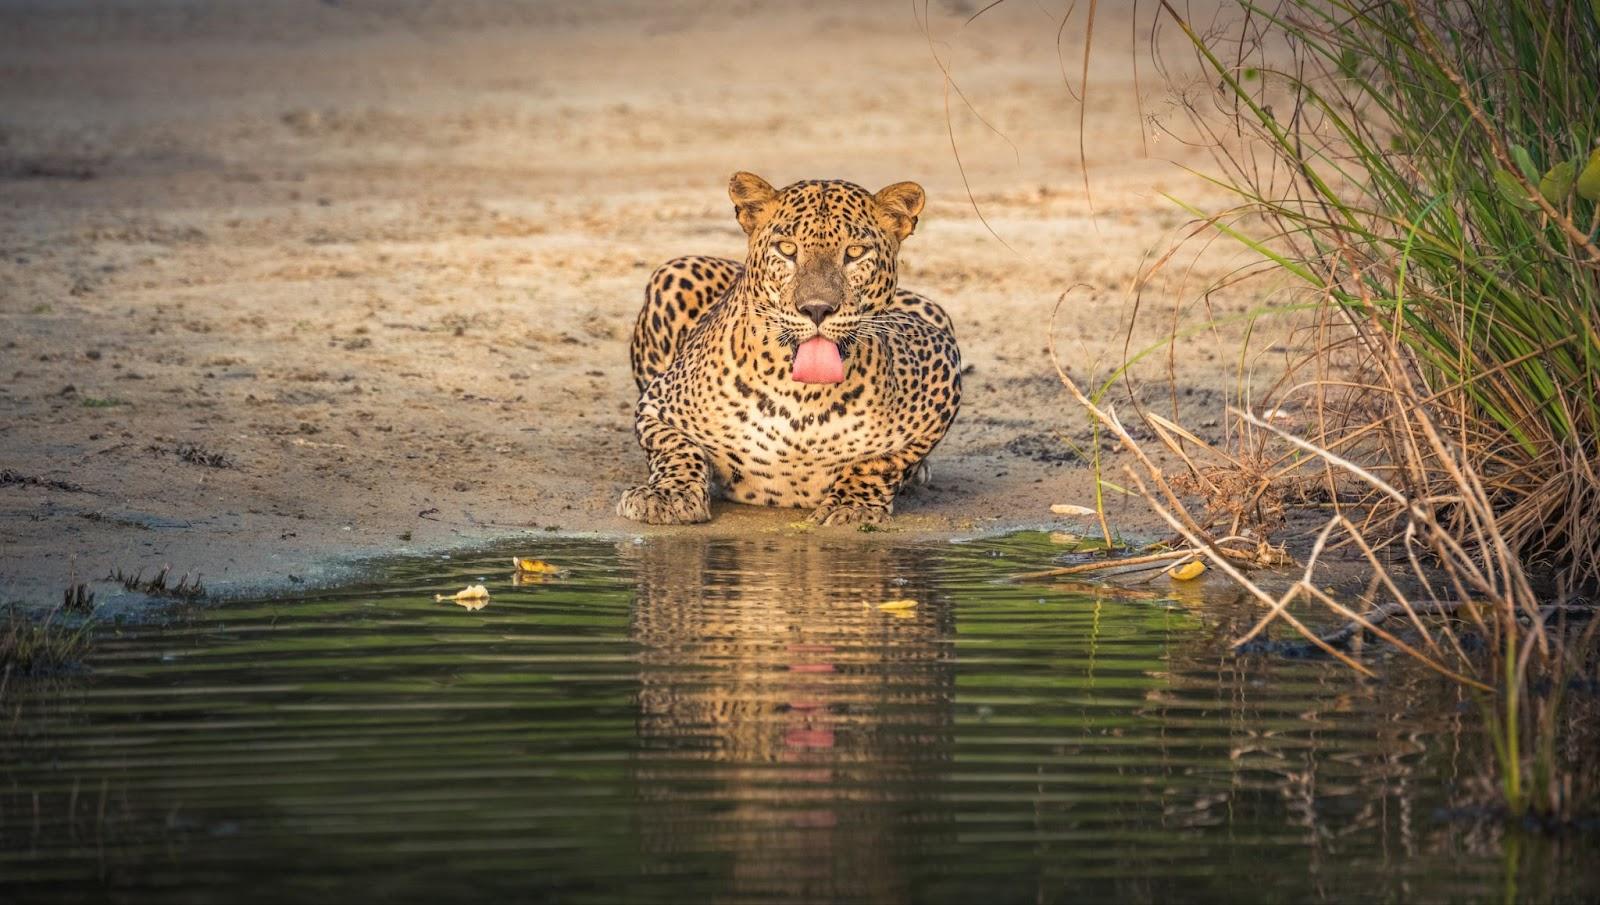 Leopard drinking out out a watering hole in Wilpattu National Park